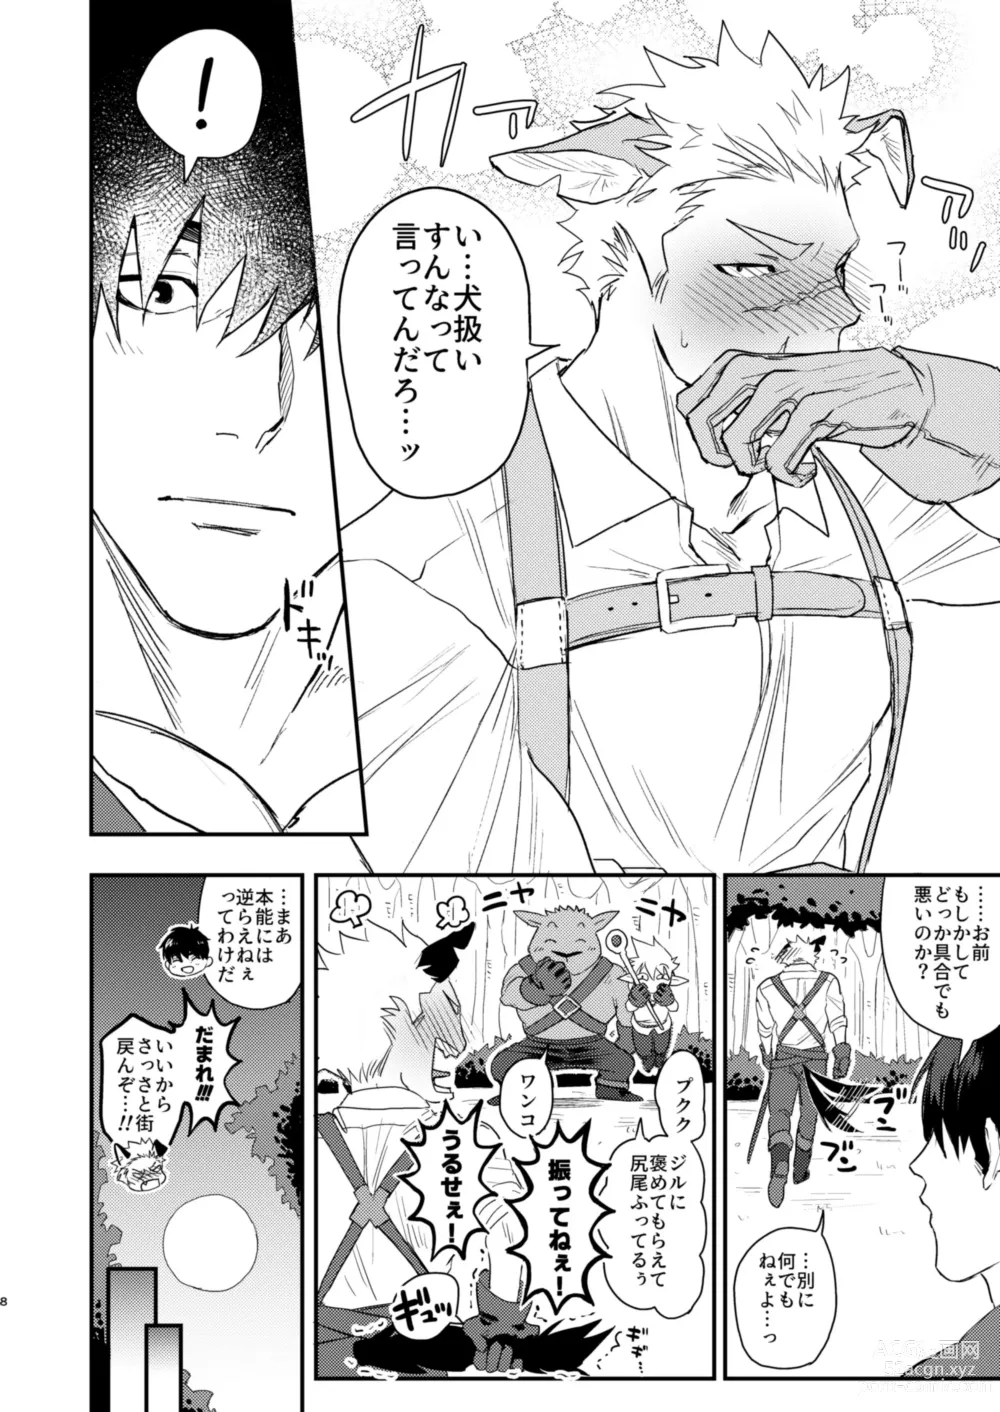 Page 5 of doujinshi It Looks like My Dog is in Heat